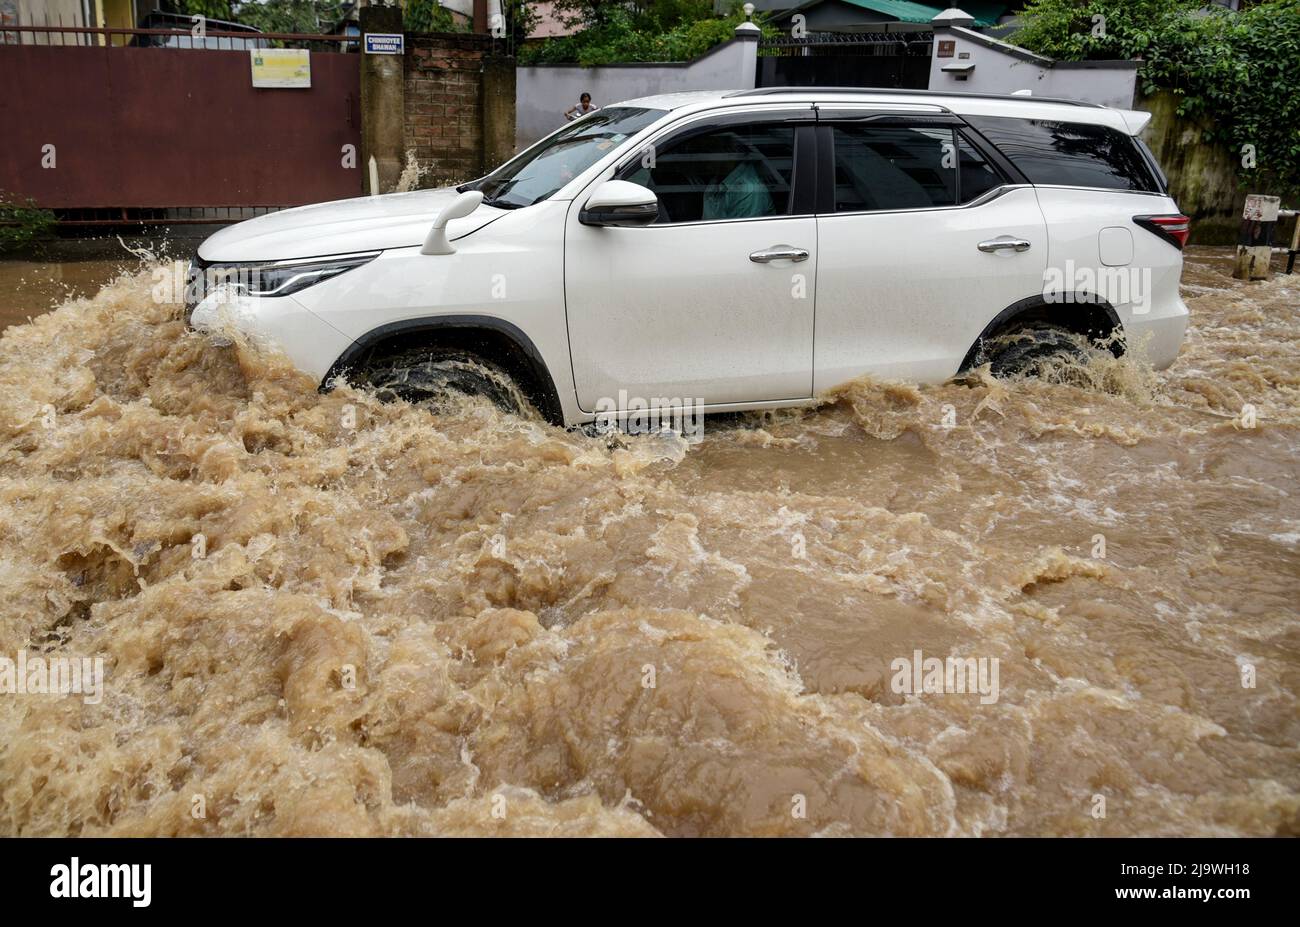 Guwahati, Assam, India. 25th May, 2022. A car wades across a flooded street after heavy rains, in Guwahati, Assam, India on 25 May 2022. Waterlogging is a common scene in Guwahati city due to poor drainage system. Credit: David Talukdar/Alamy Live News Stock Photo